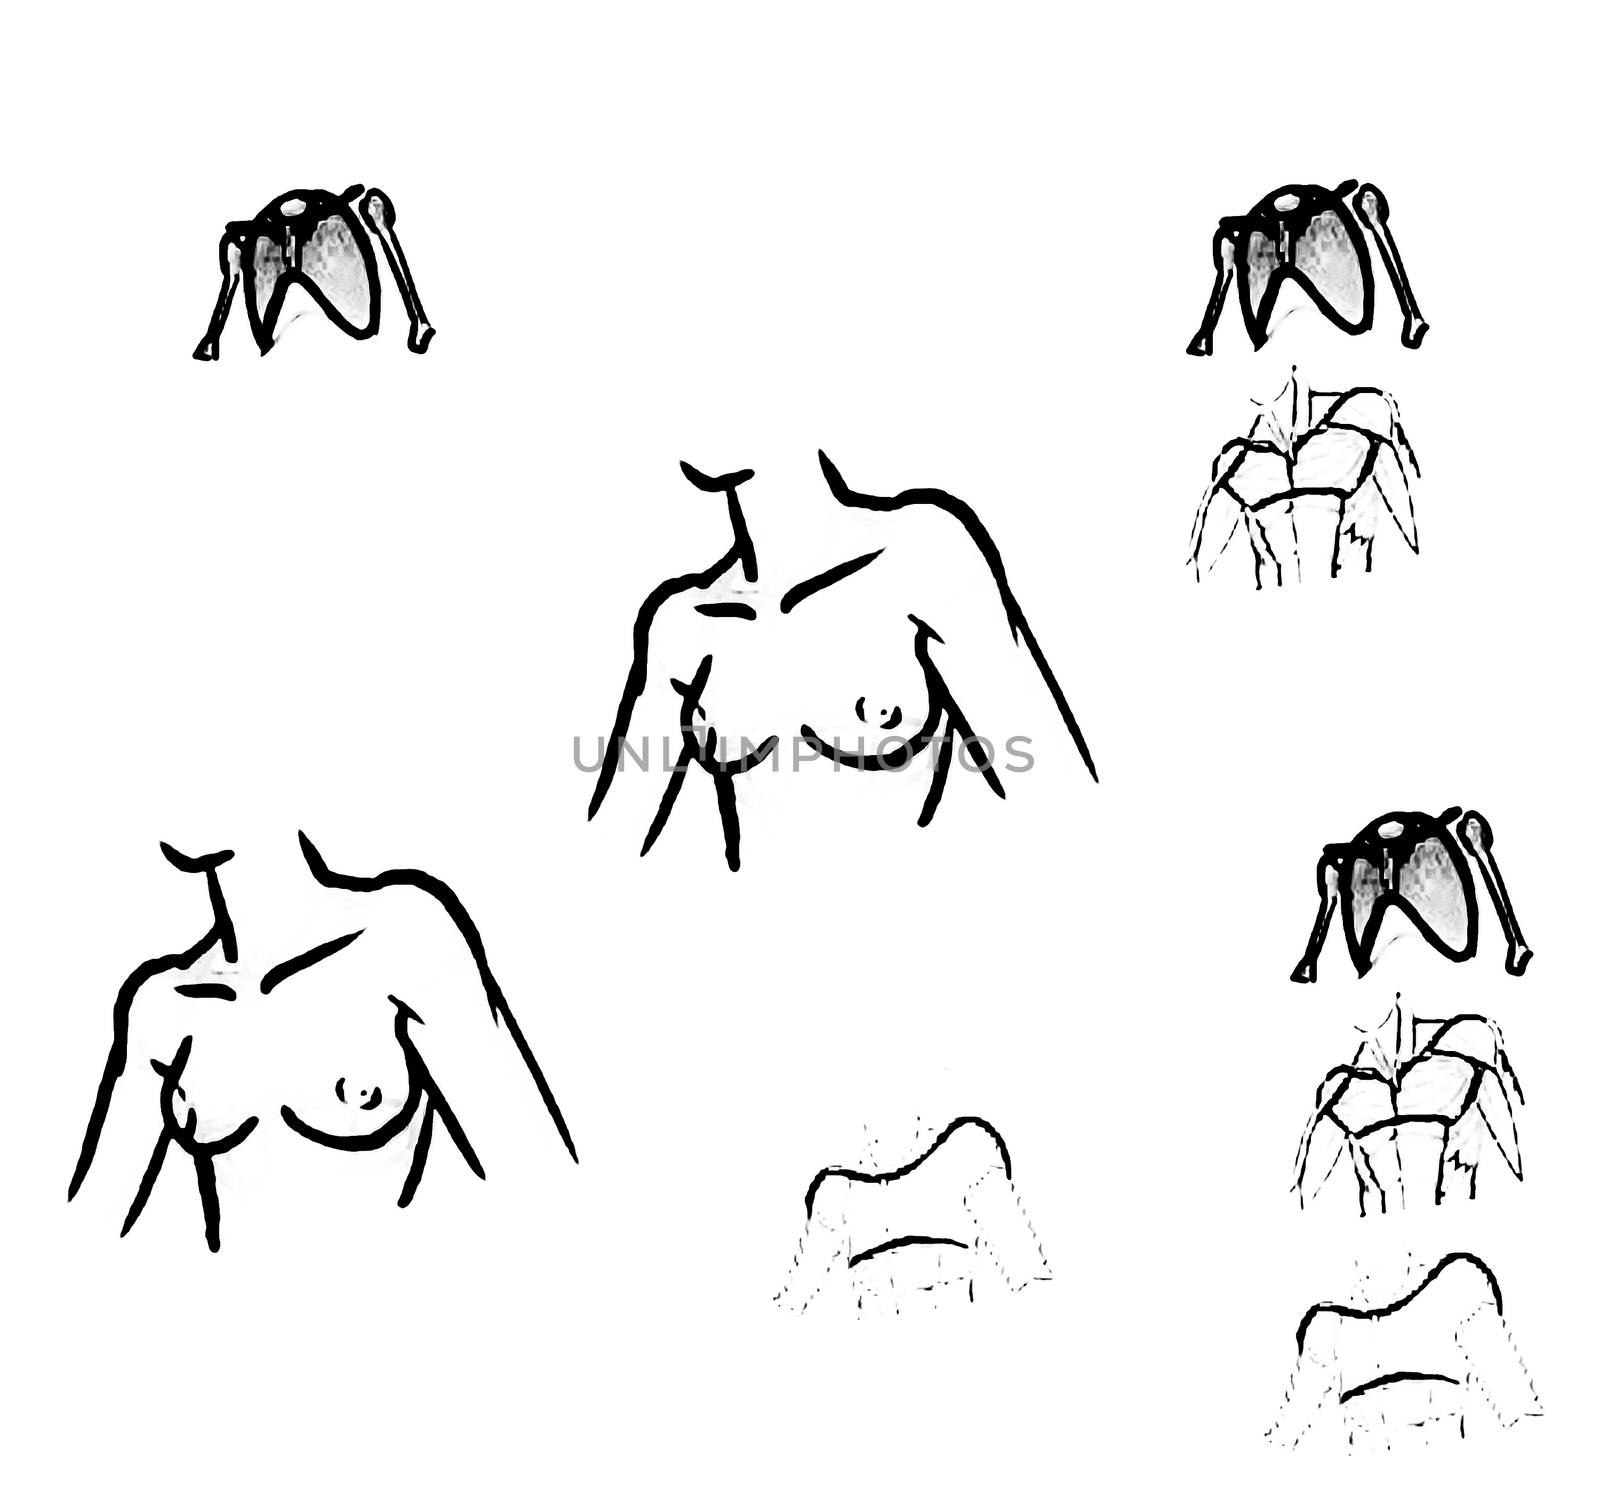 Tutorial of drawing a female body. Drawing the human body, step by step lessons. Female breast drawing tutorial. Drawing a woman's body with an emphasis on breasts.